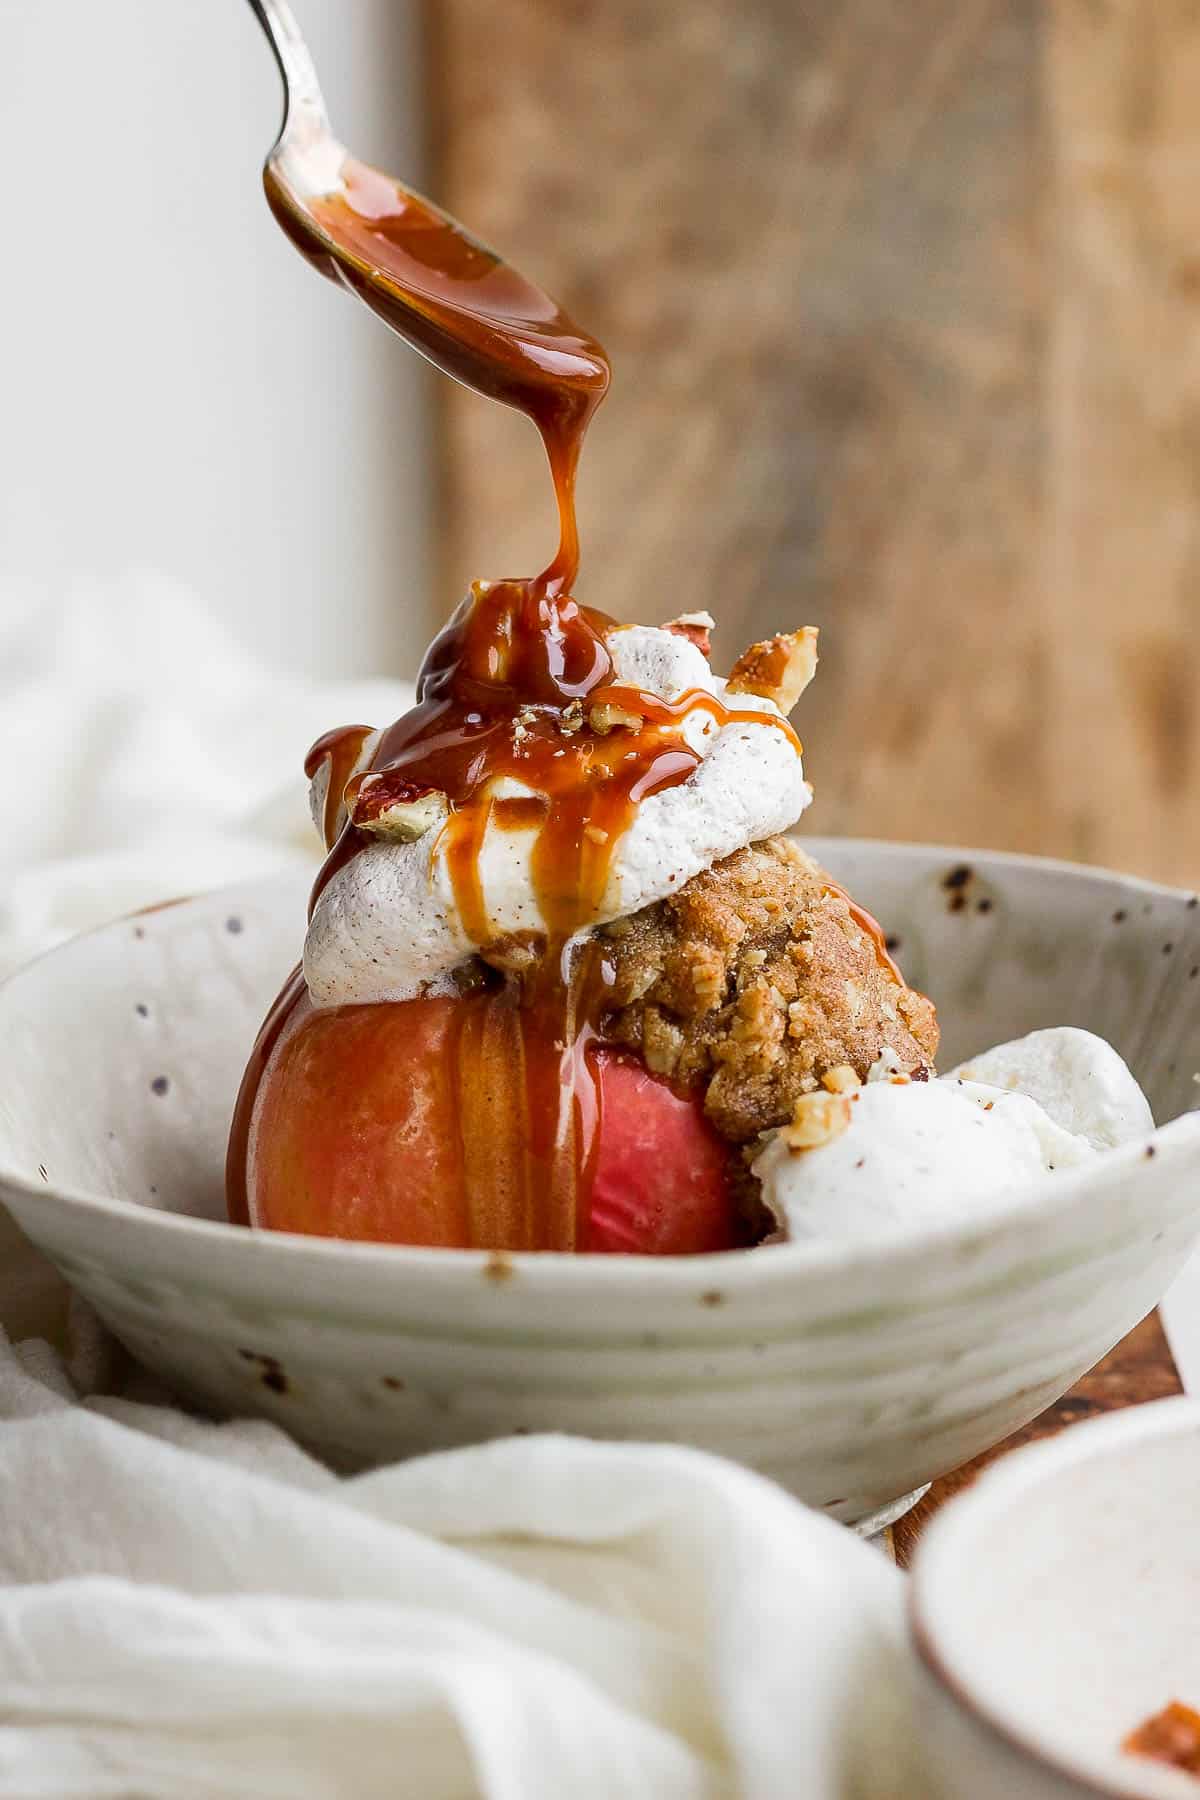 A baked apple in a bowl with ice cream, whipped cream, walnuts, and caramel being drizzled on top.